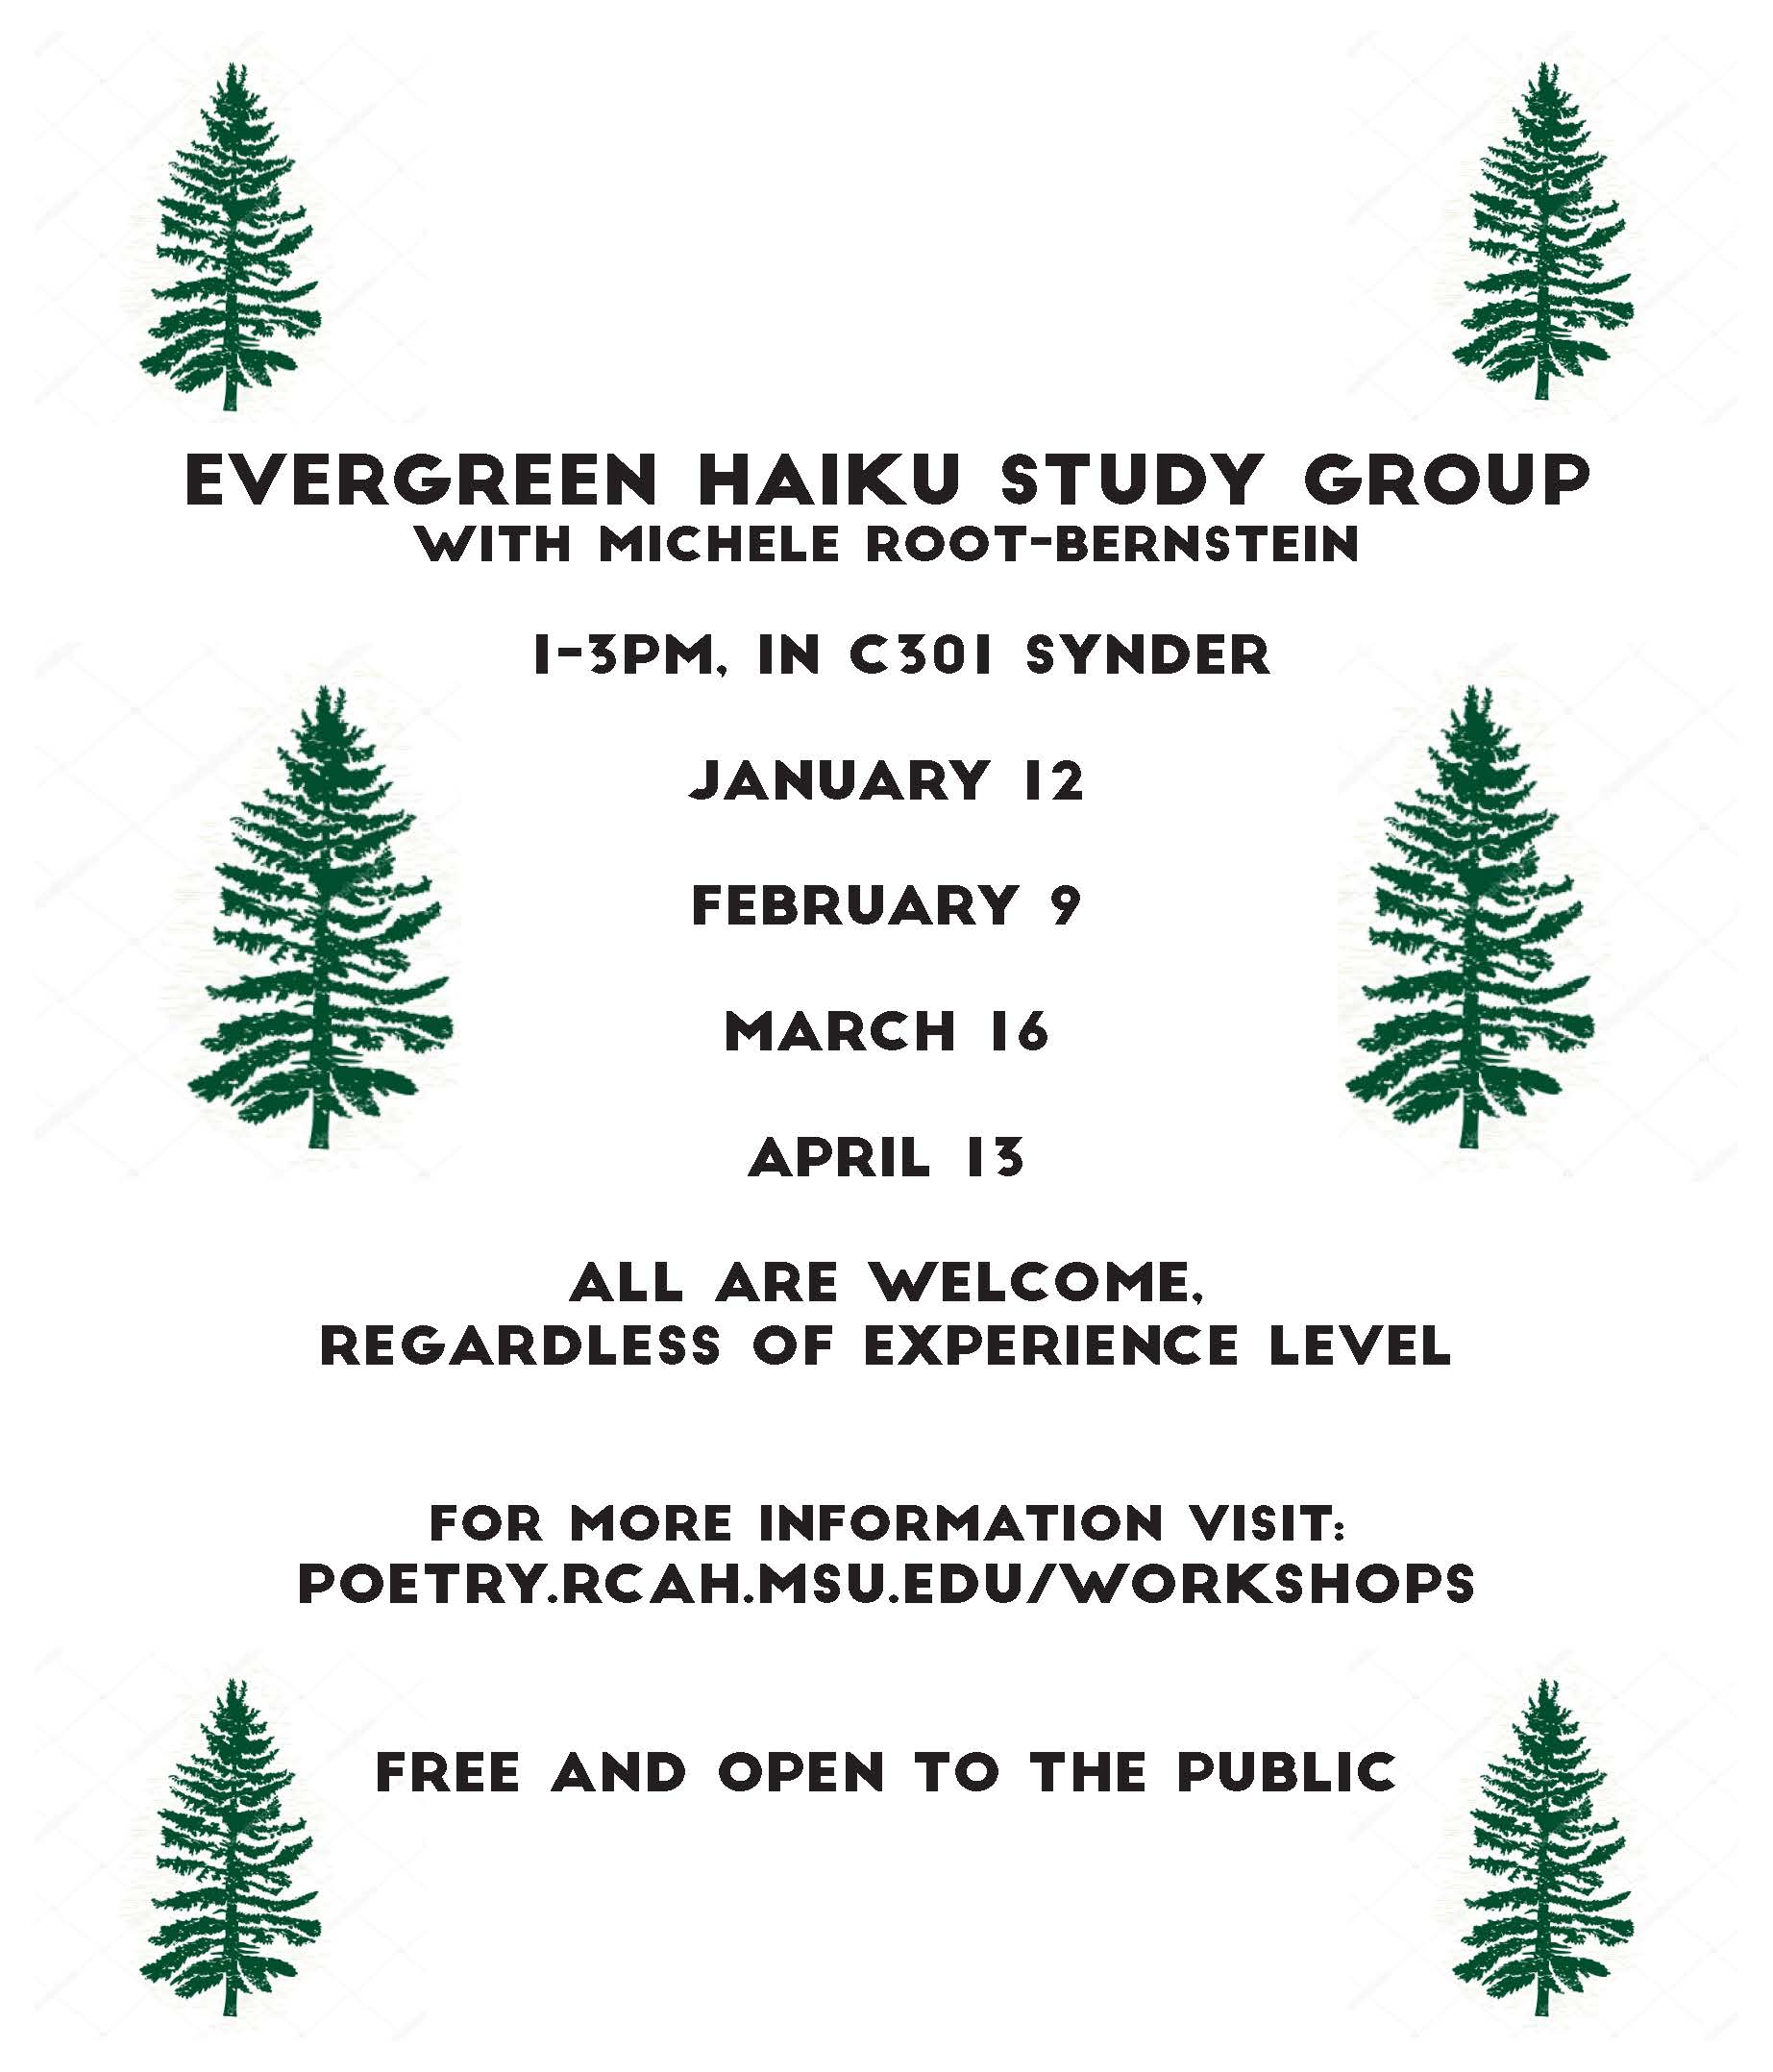 Evergreen Haiku study group flyer. Click to download pdf with text.